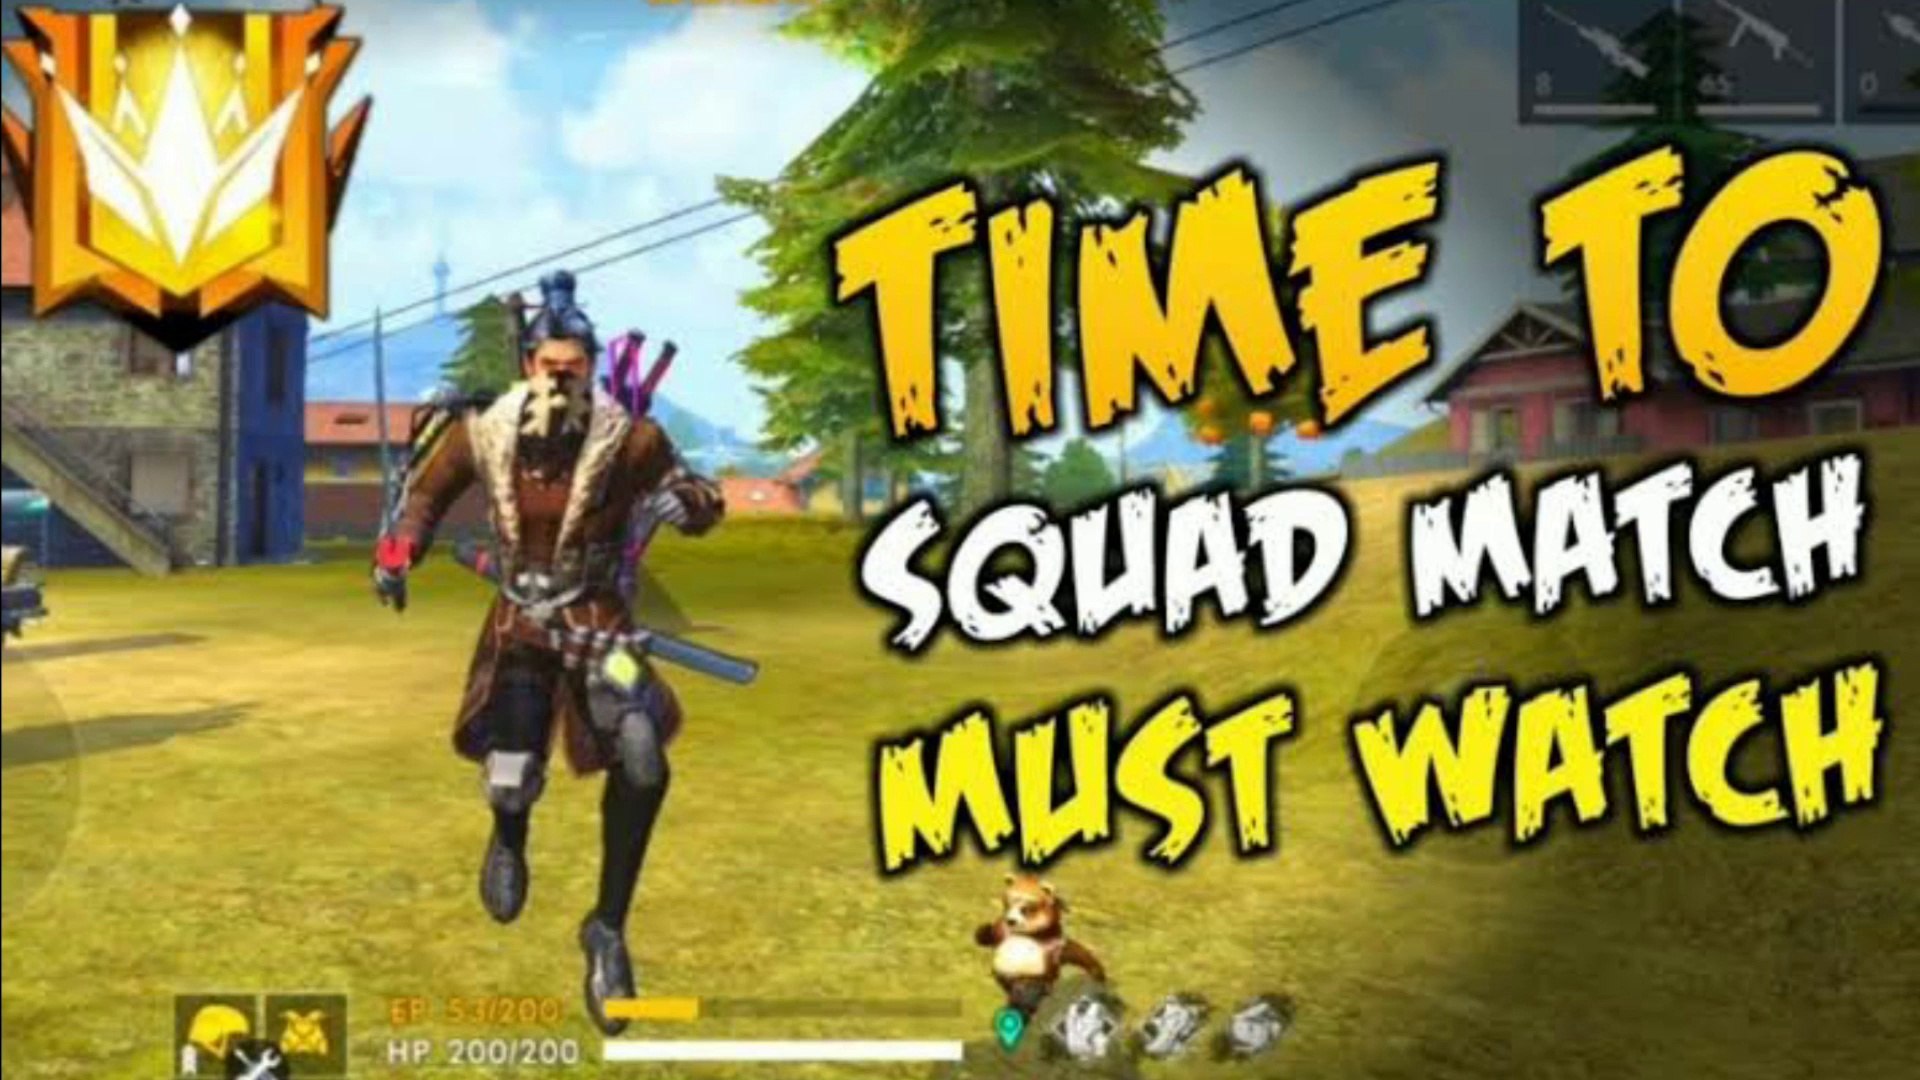 Top 10 Funny moments Game Play Garena Free fire!! Solo vs Squad Ranked  Match Game Play!! Dou vs Squad Rush Game Play Battle Ground Garena Free Fire!!  - video Dailymotion